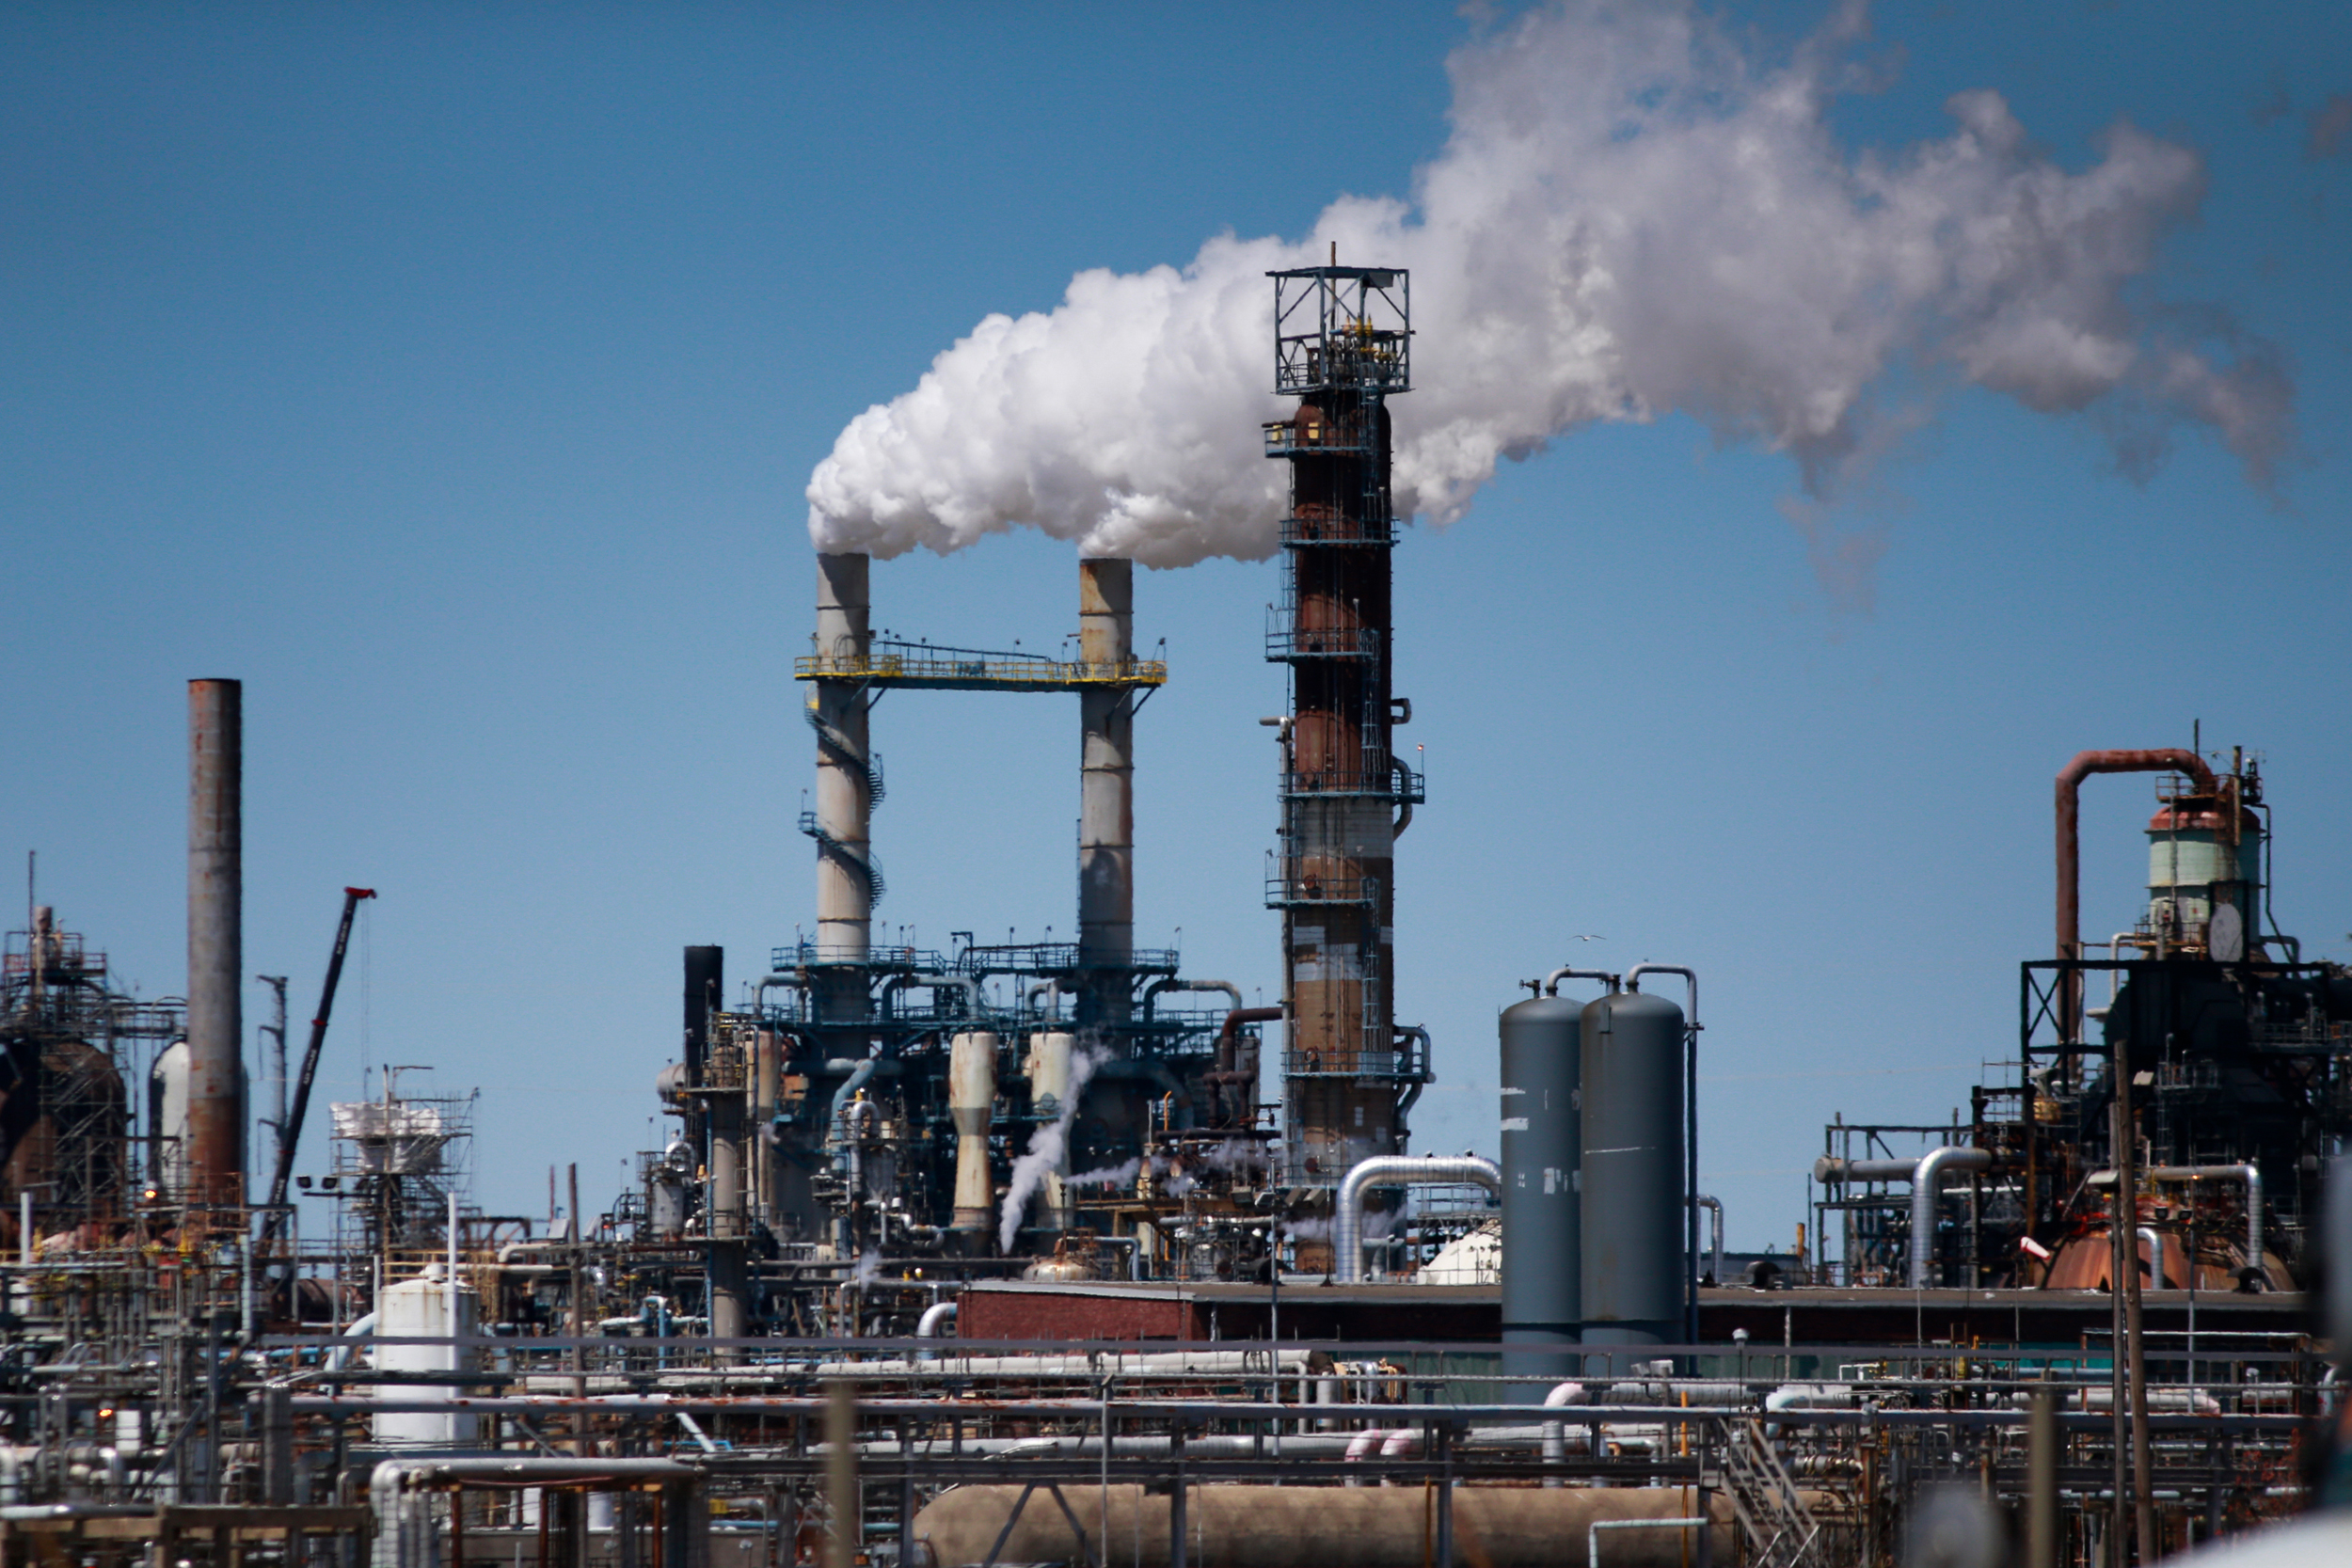 The Linden Cogeneration Plant is seen in Linden, N.J. The EPA said it will delay action on the more than 2,000 existing natural gas plants that are now responsible for 43 percent of the sector’s greenhouse gas pollution. Credit: Kena Betancur/VIEWpress